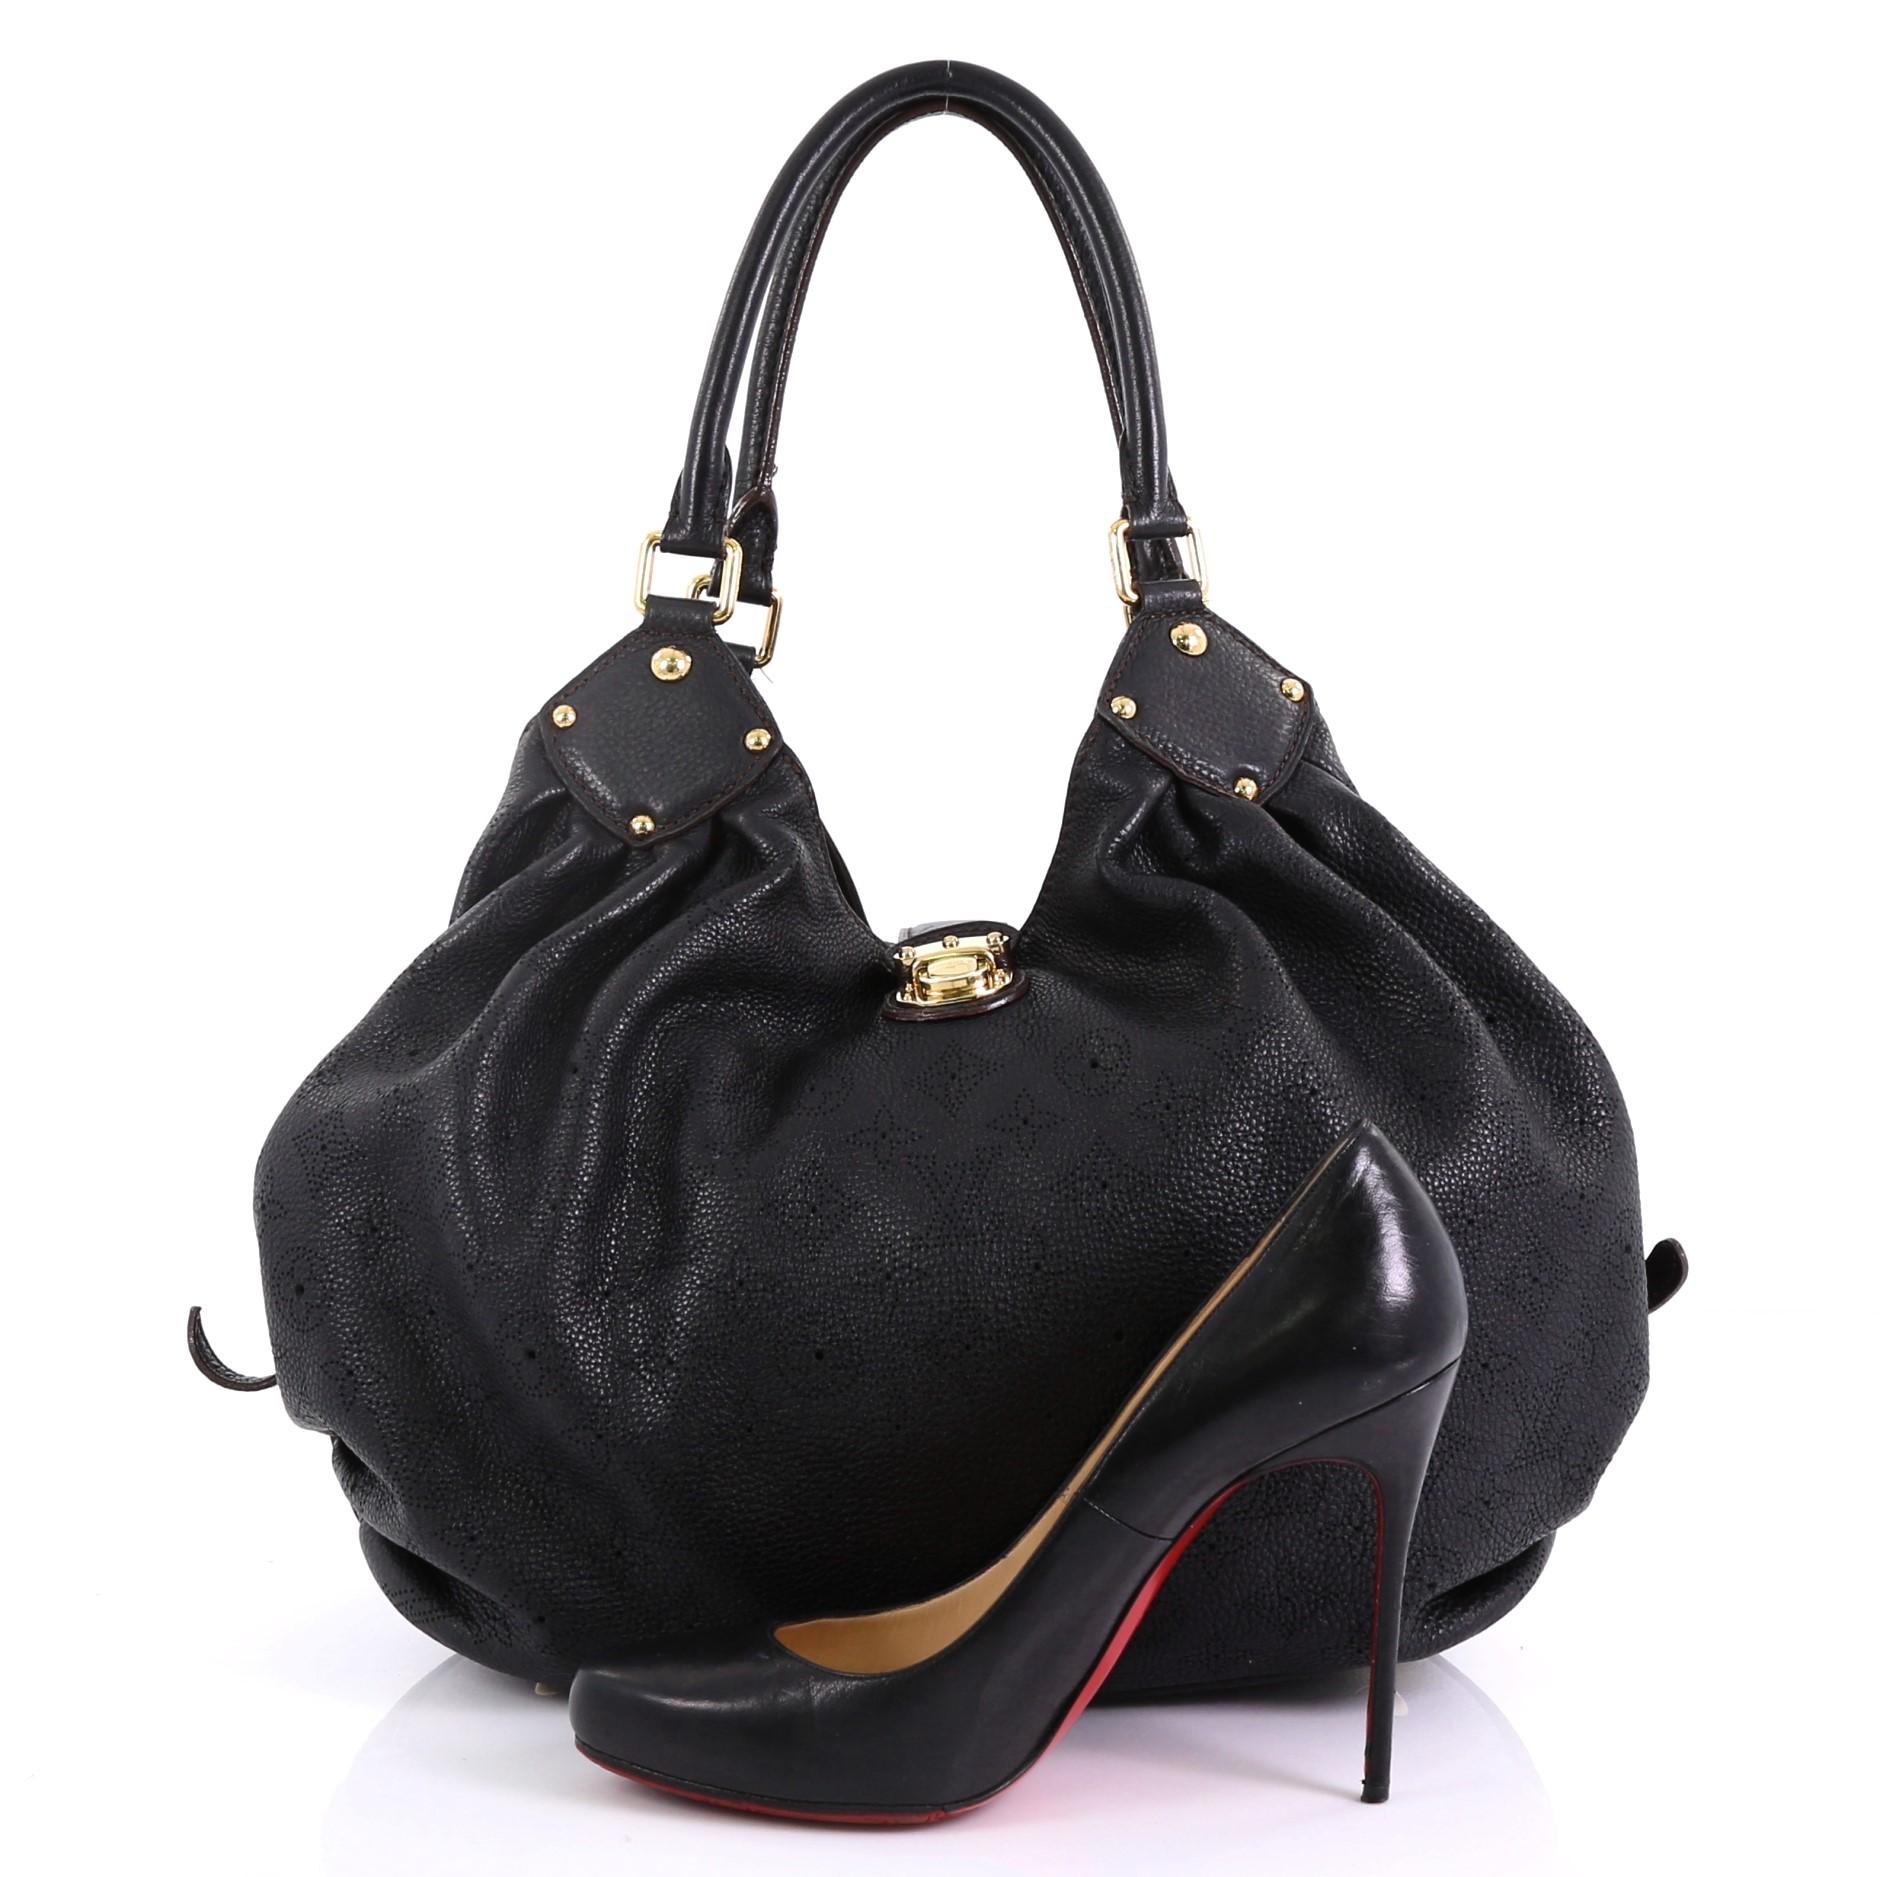 This Louis Vuitton L Hobo Mahina Leather, crafted from black monogram mahina leather, features dual rolled handles, buckle and stud details, and gold-tone hardware. Its engraved top flap push-lock closure opens to a brown microfiber interior with